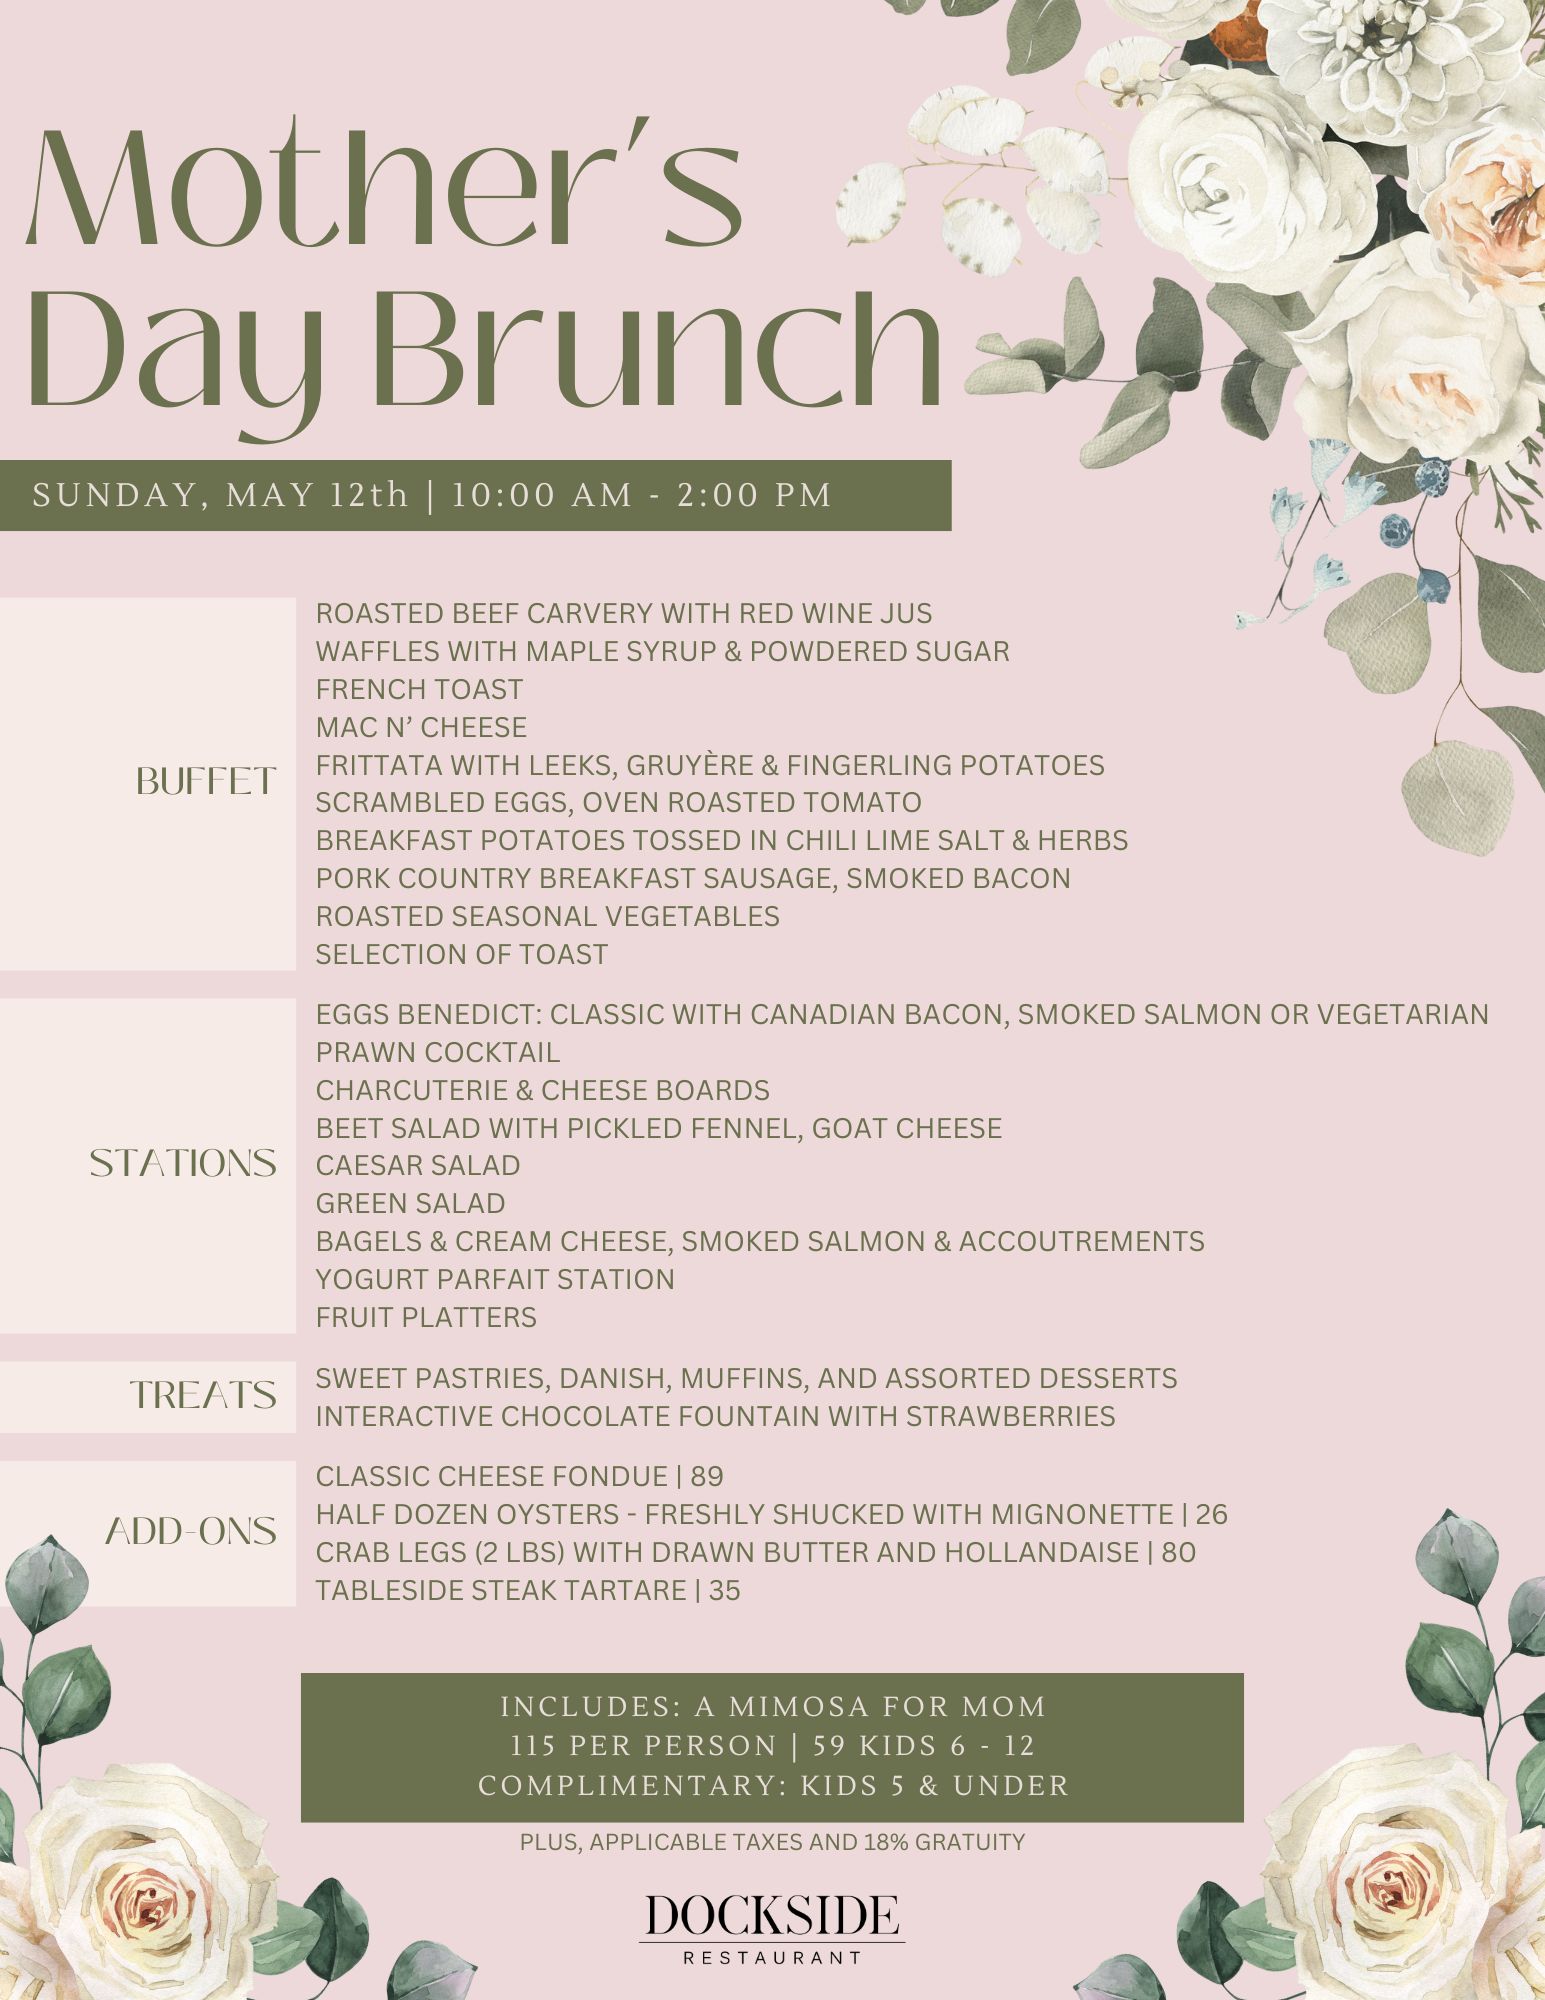 mother's day brunch buffet in vancouver menu